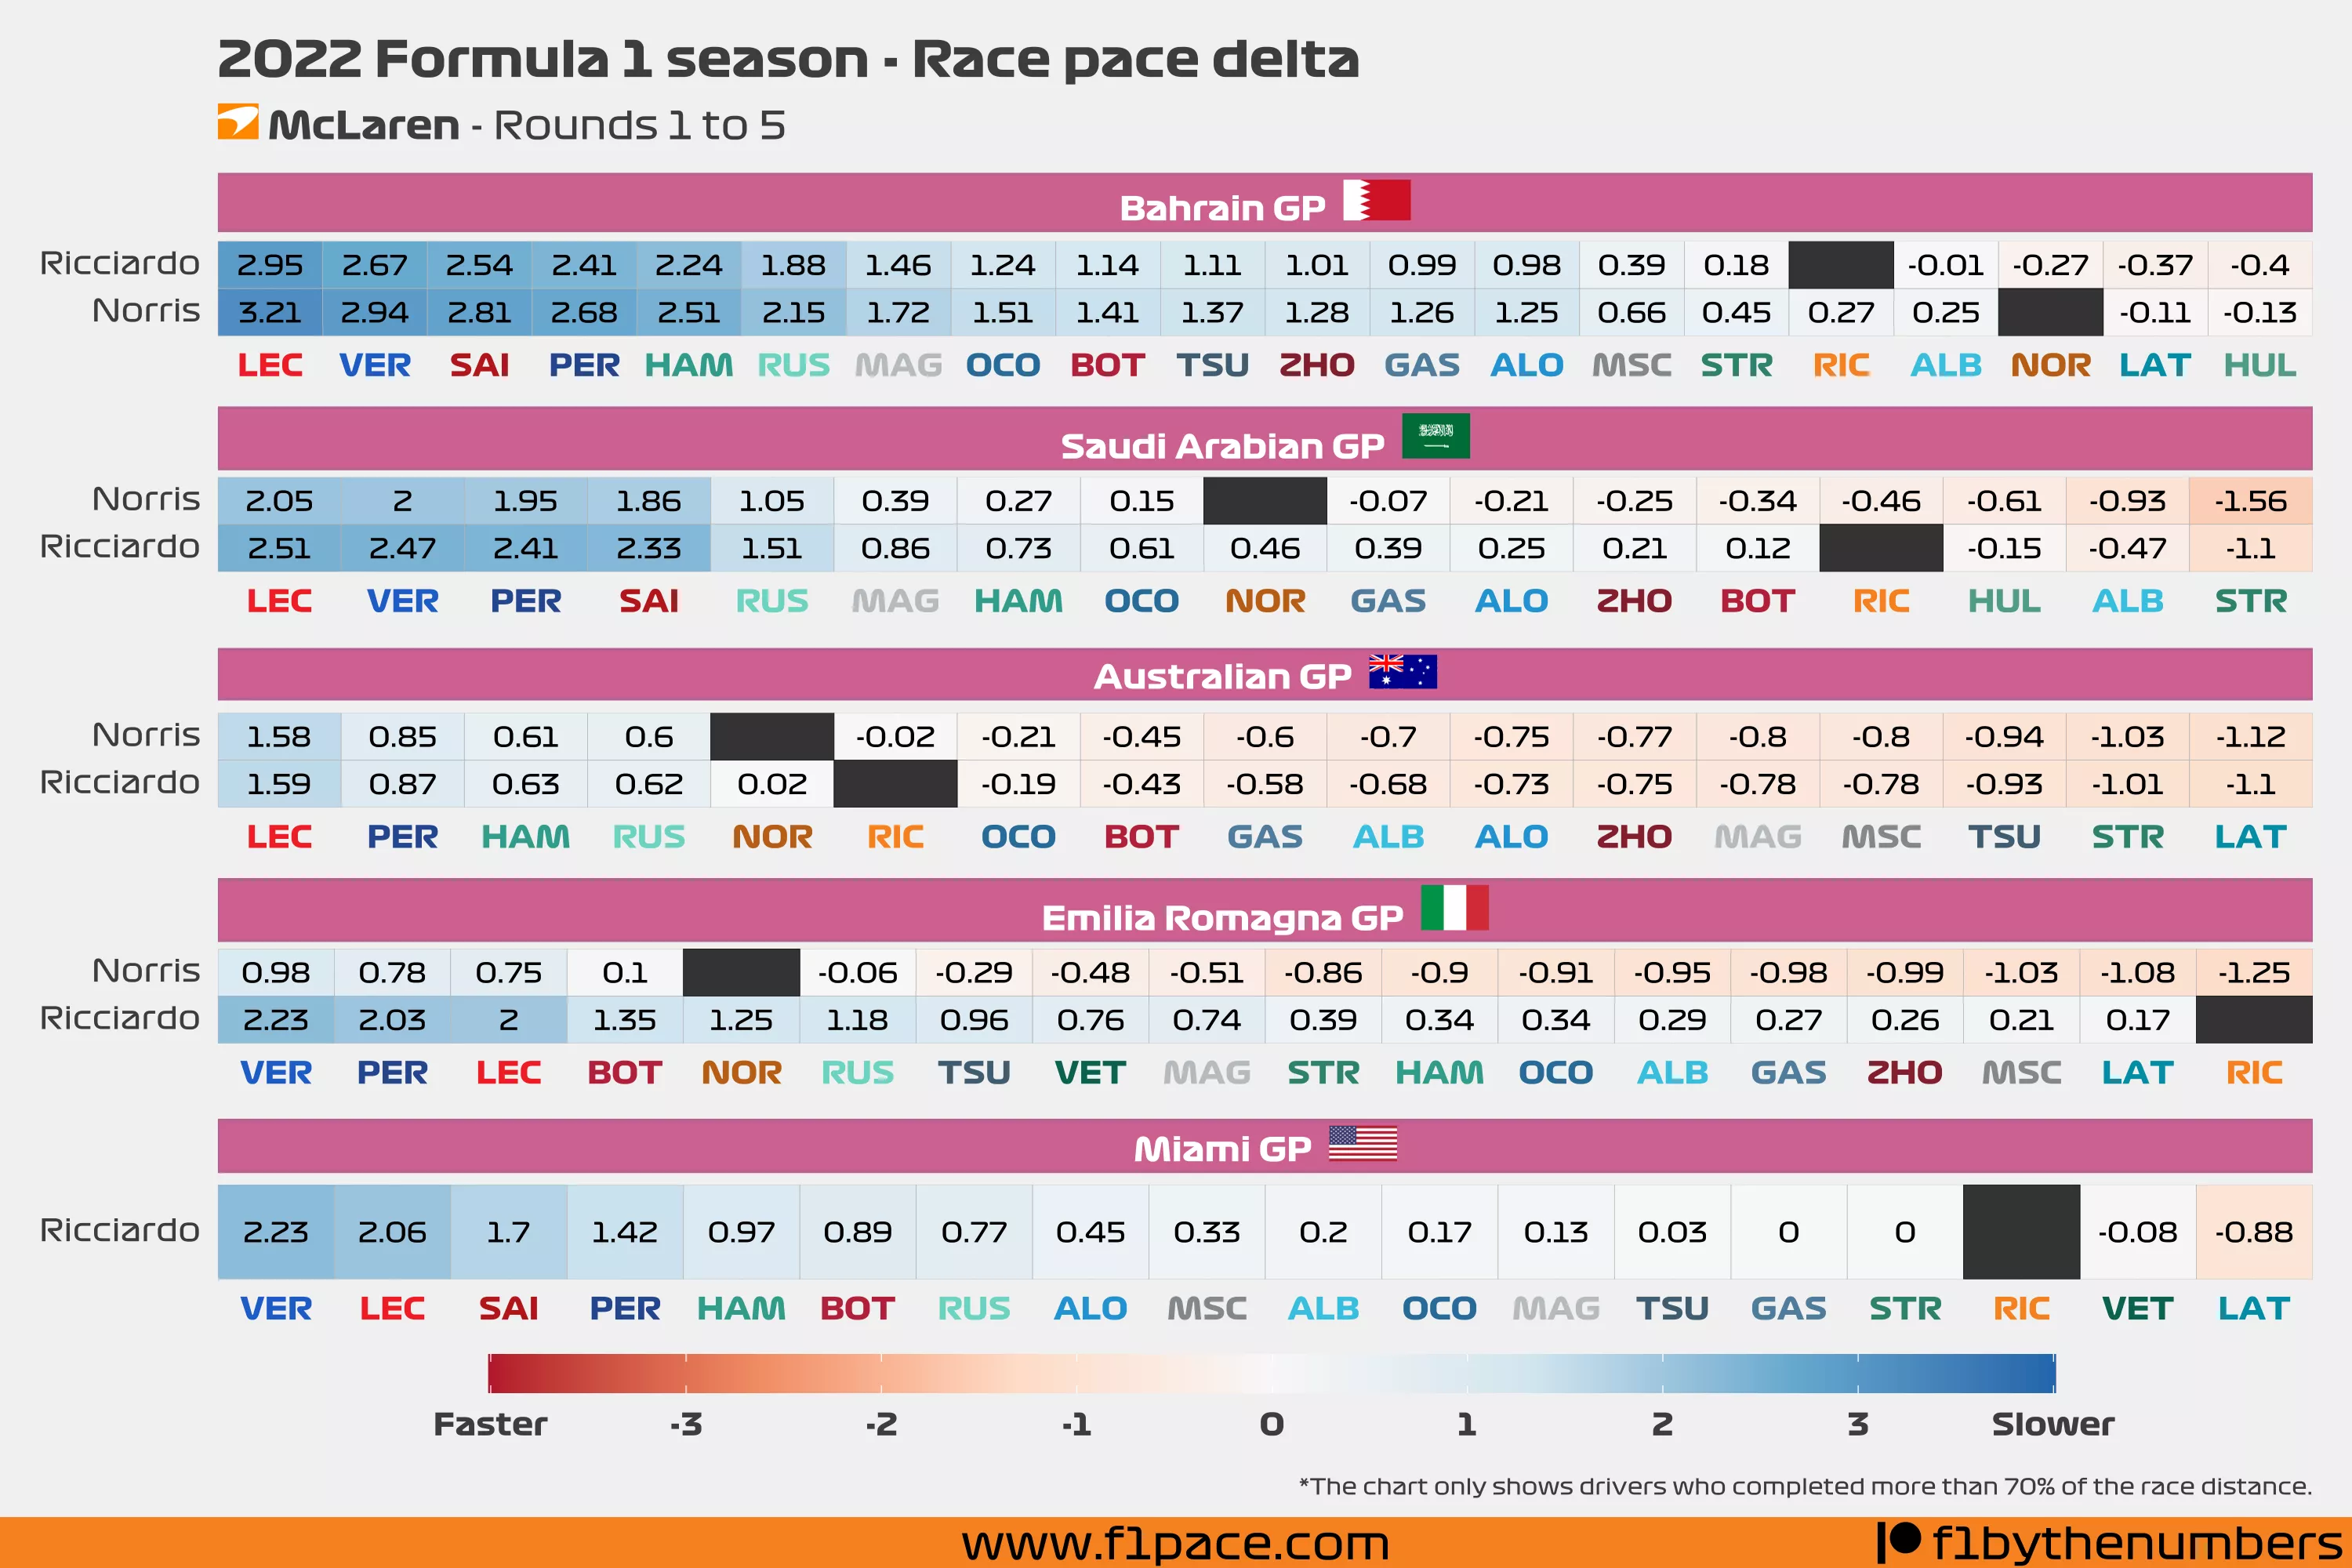 Race pace delta: Rounds to 1 to 5 - McLaren